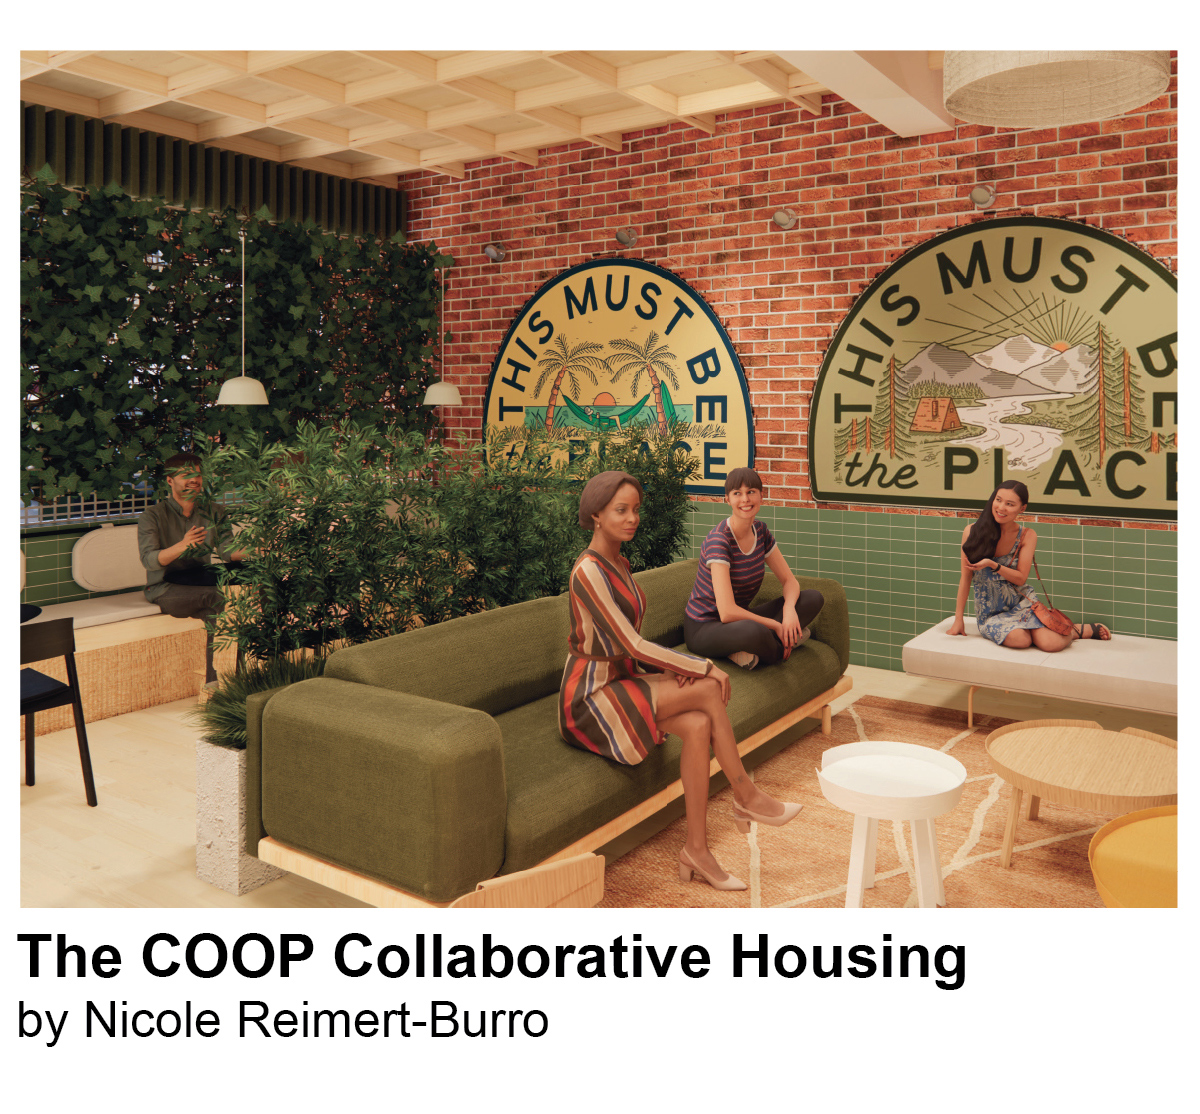 The COOP Collaborative Housing by Nicole Reimert-Burro